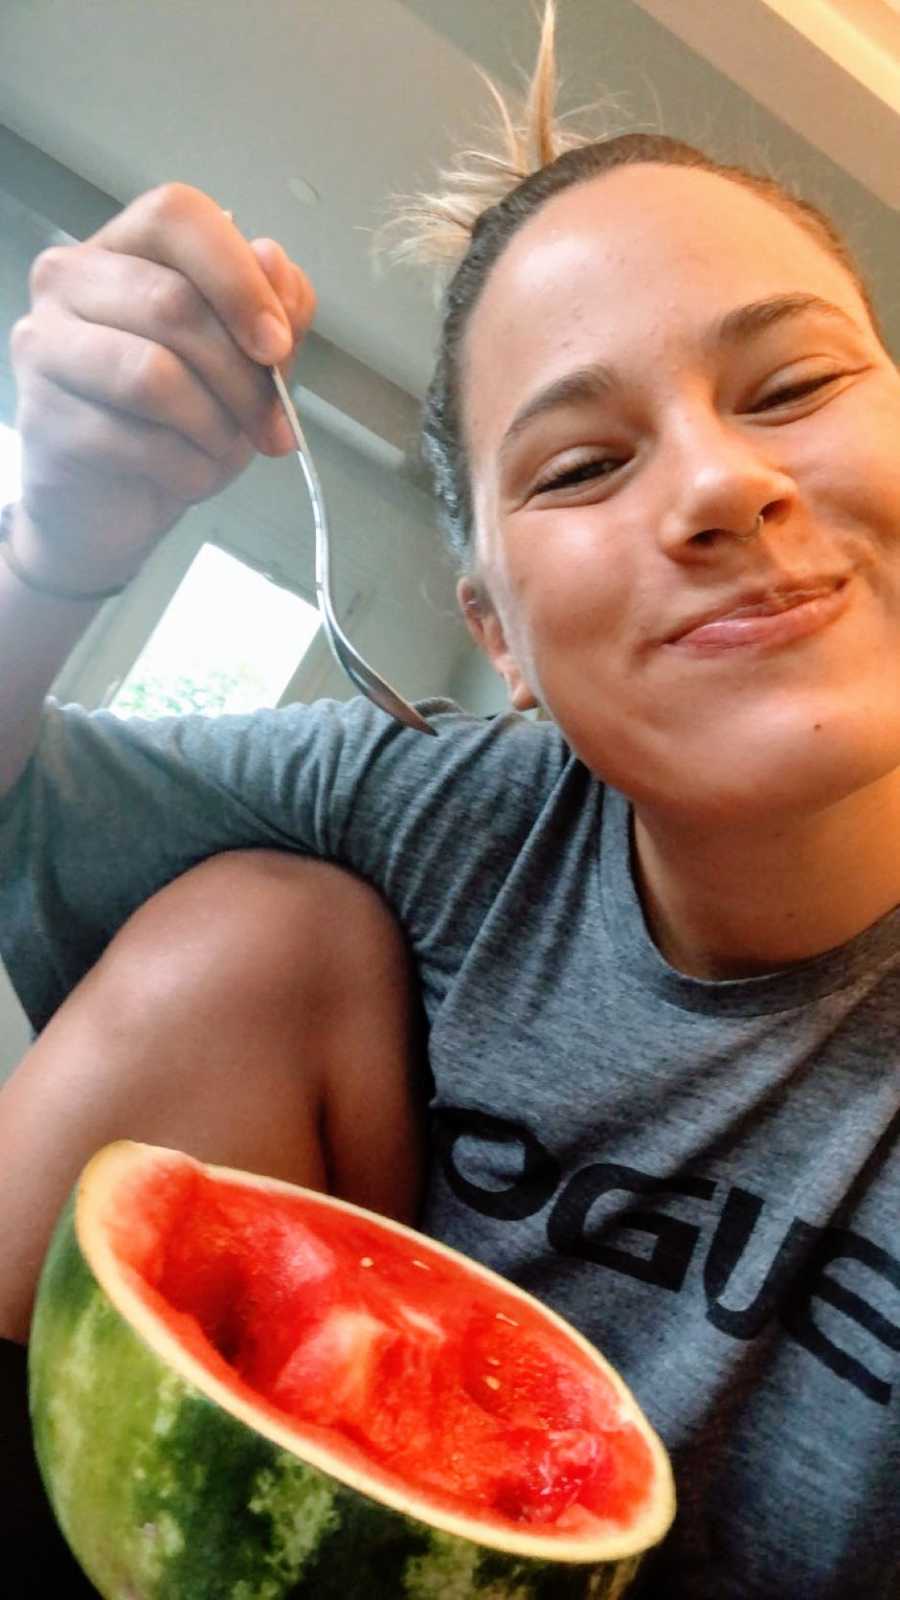 Woman smiles and takes a selfie while eating watermelon as a snack